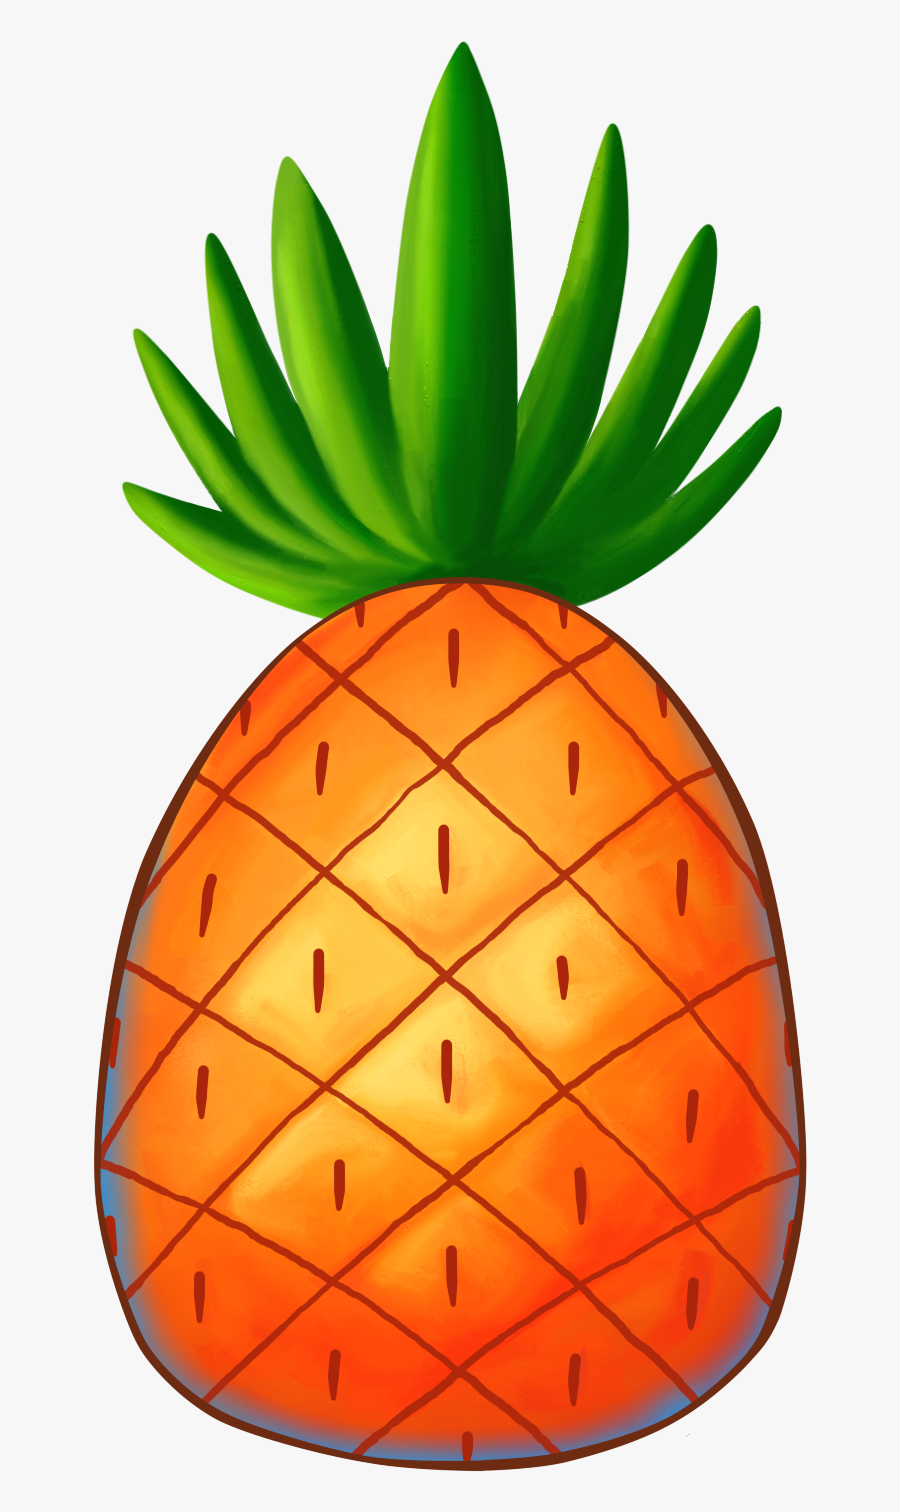 Pineapple Png Images Transparent Free Download - Spongebob Pineapple Png, Transparent Clipart